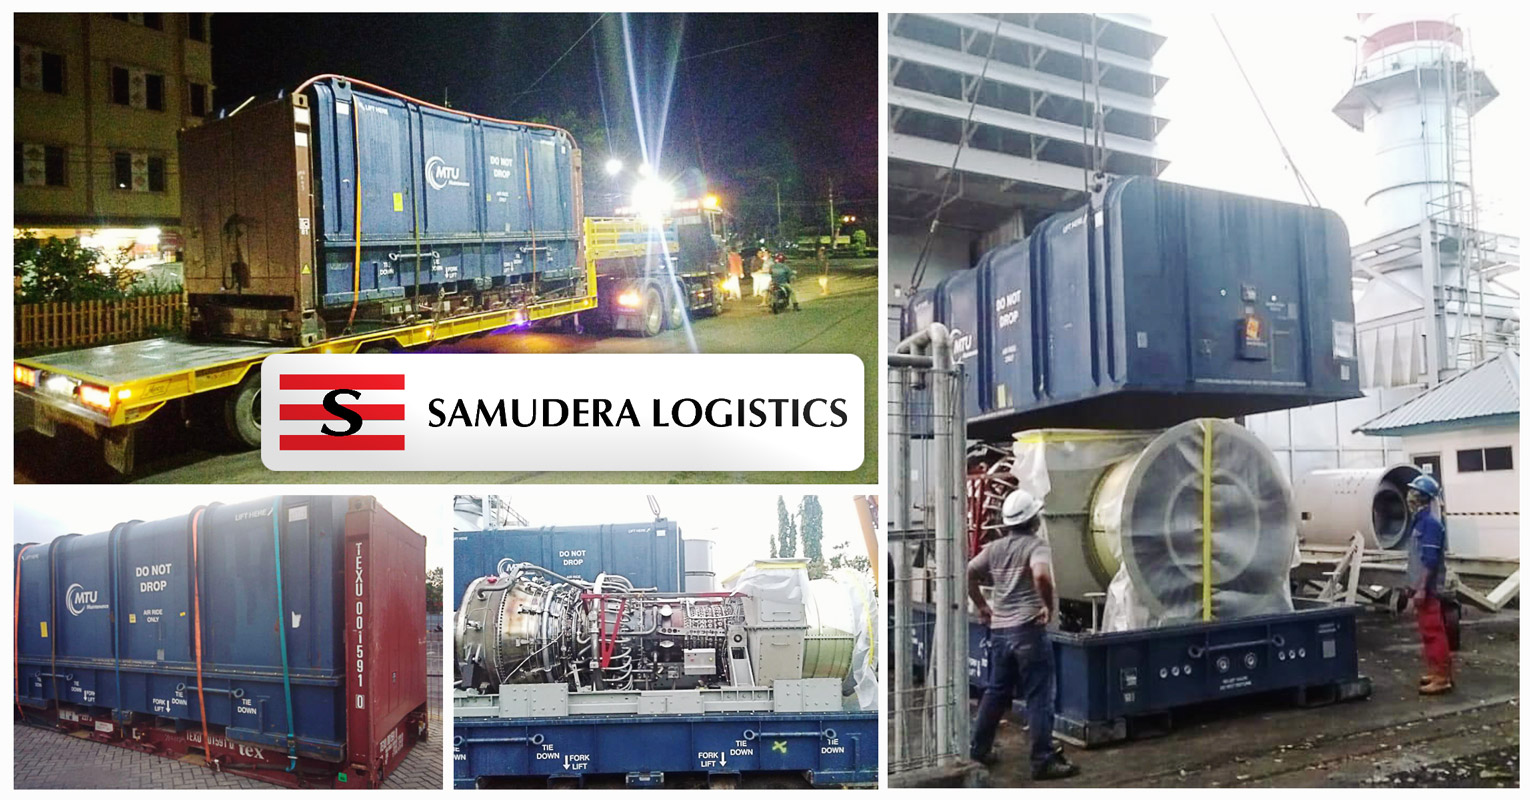 Silkargo Indonesia Delivered a Gas Turbine Engine from EXW Germany up to Palembang, Indonesia